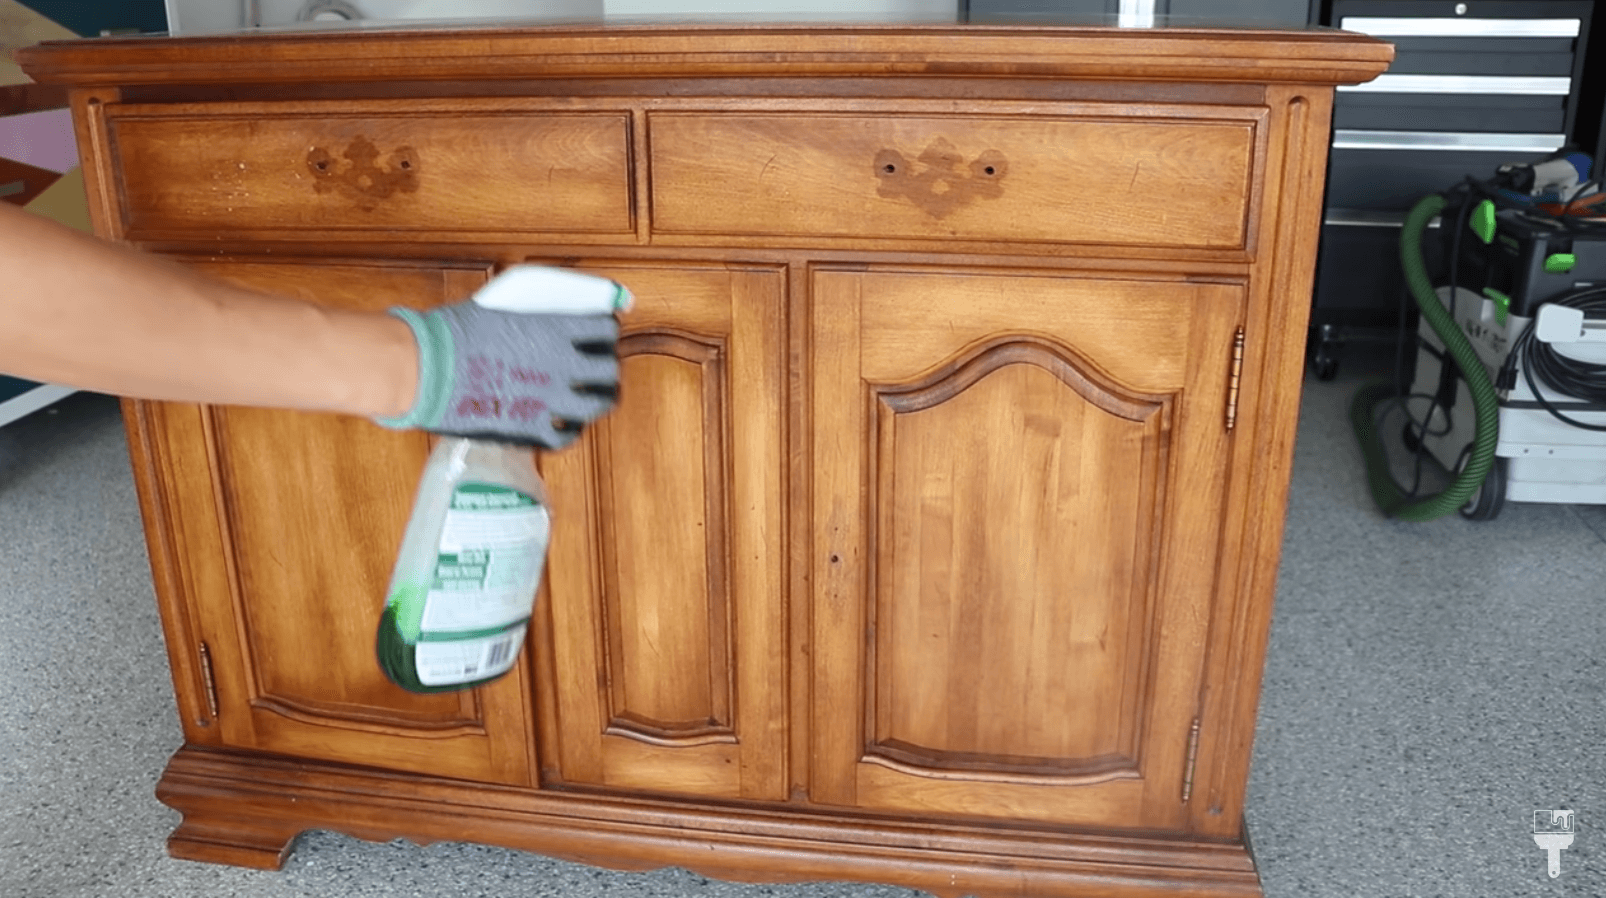 Cleaning Furniture & Cabinets Before Painting